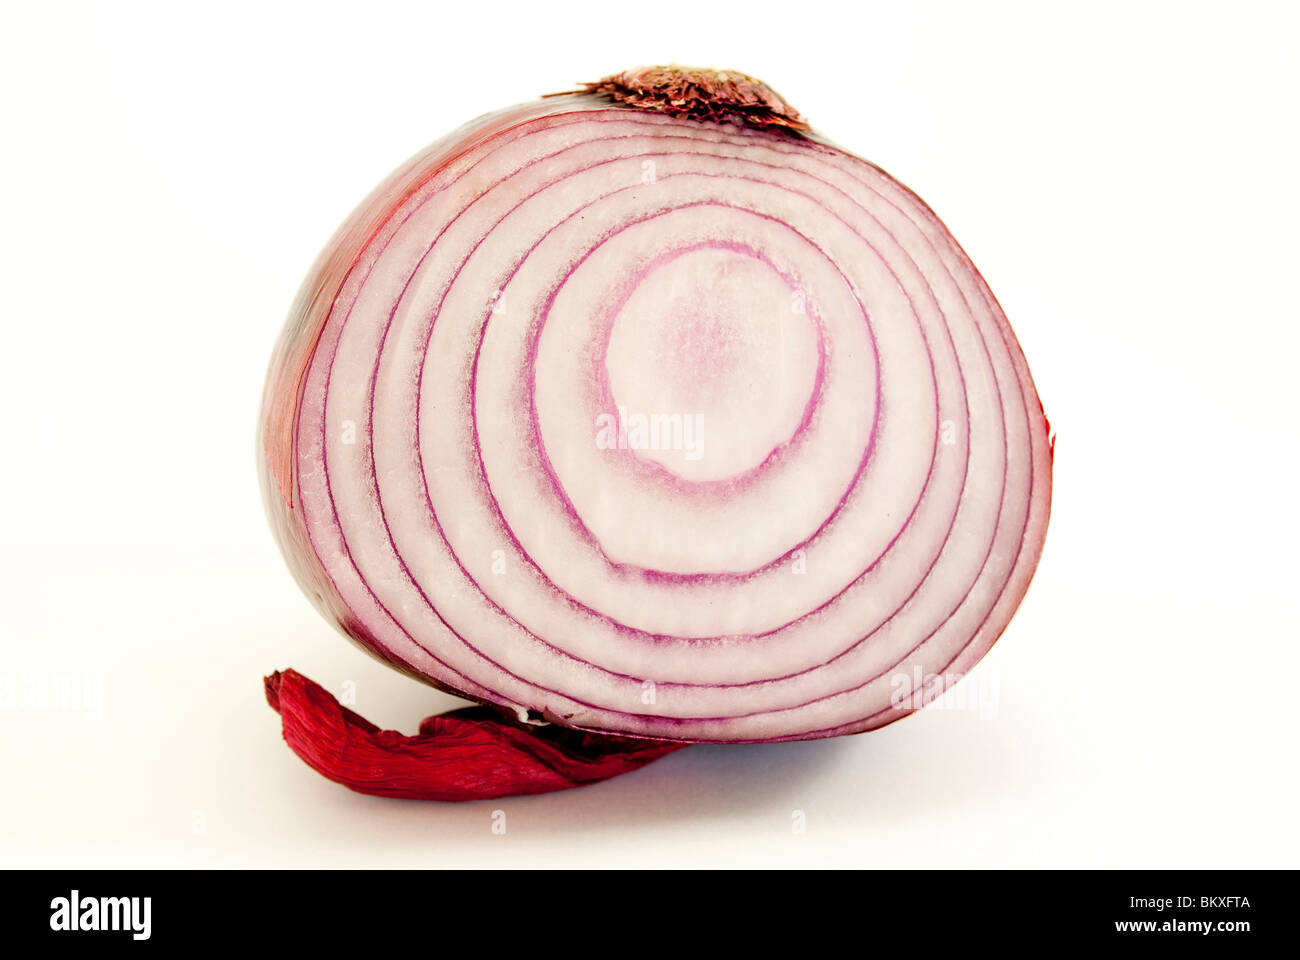 red onion Stock Photo